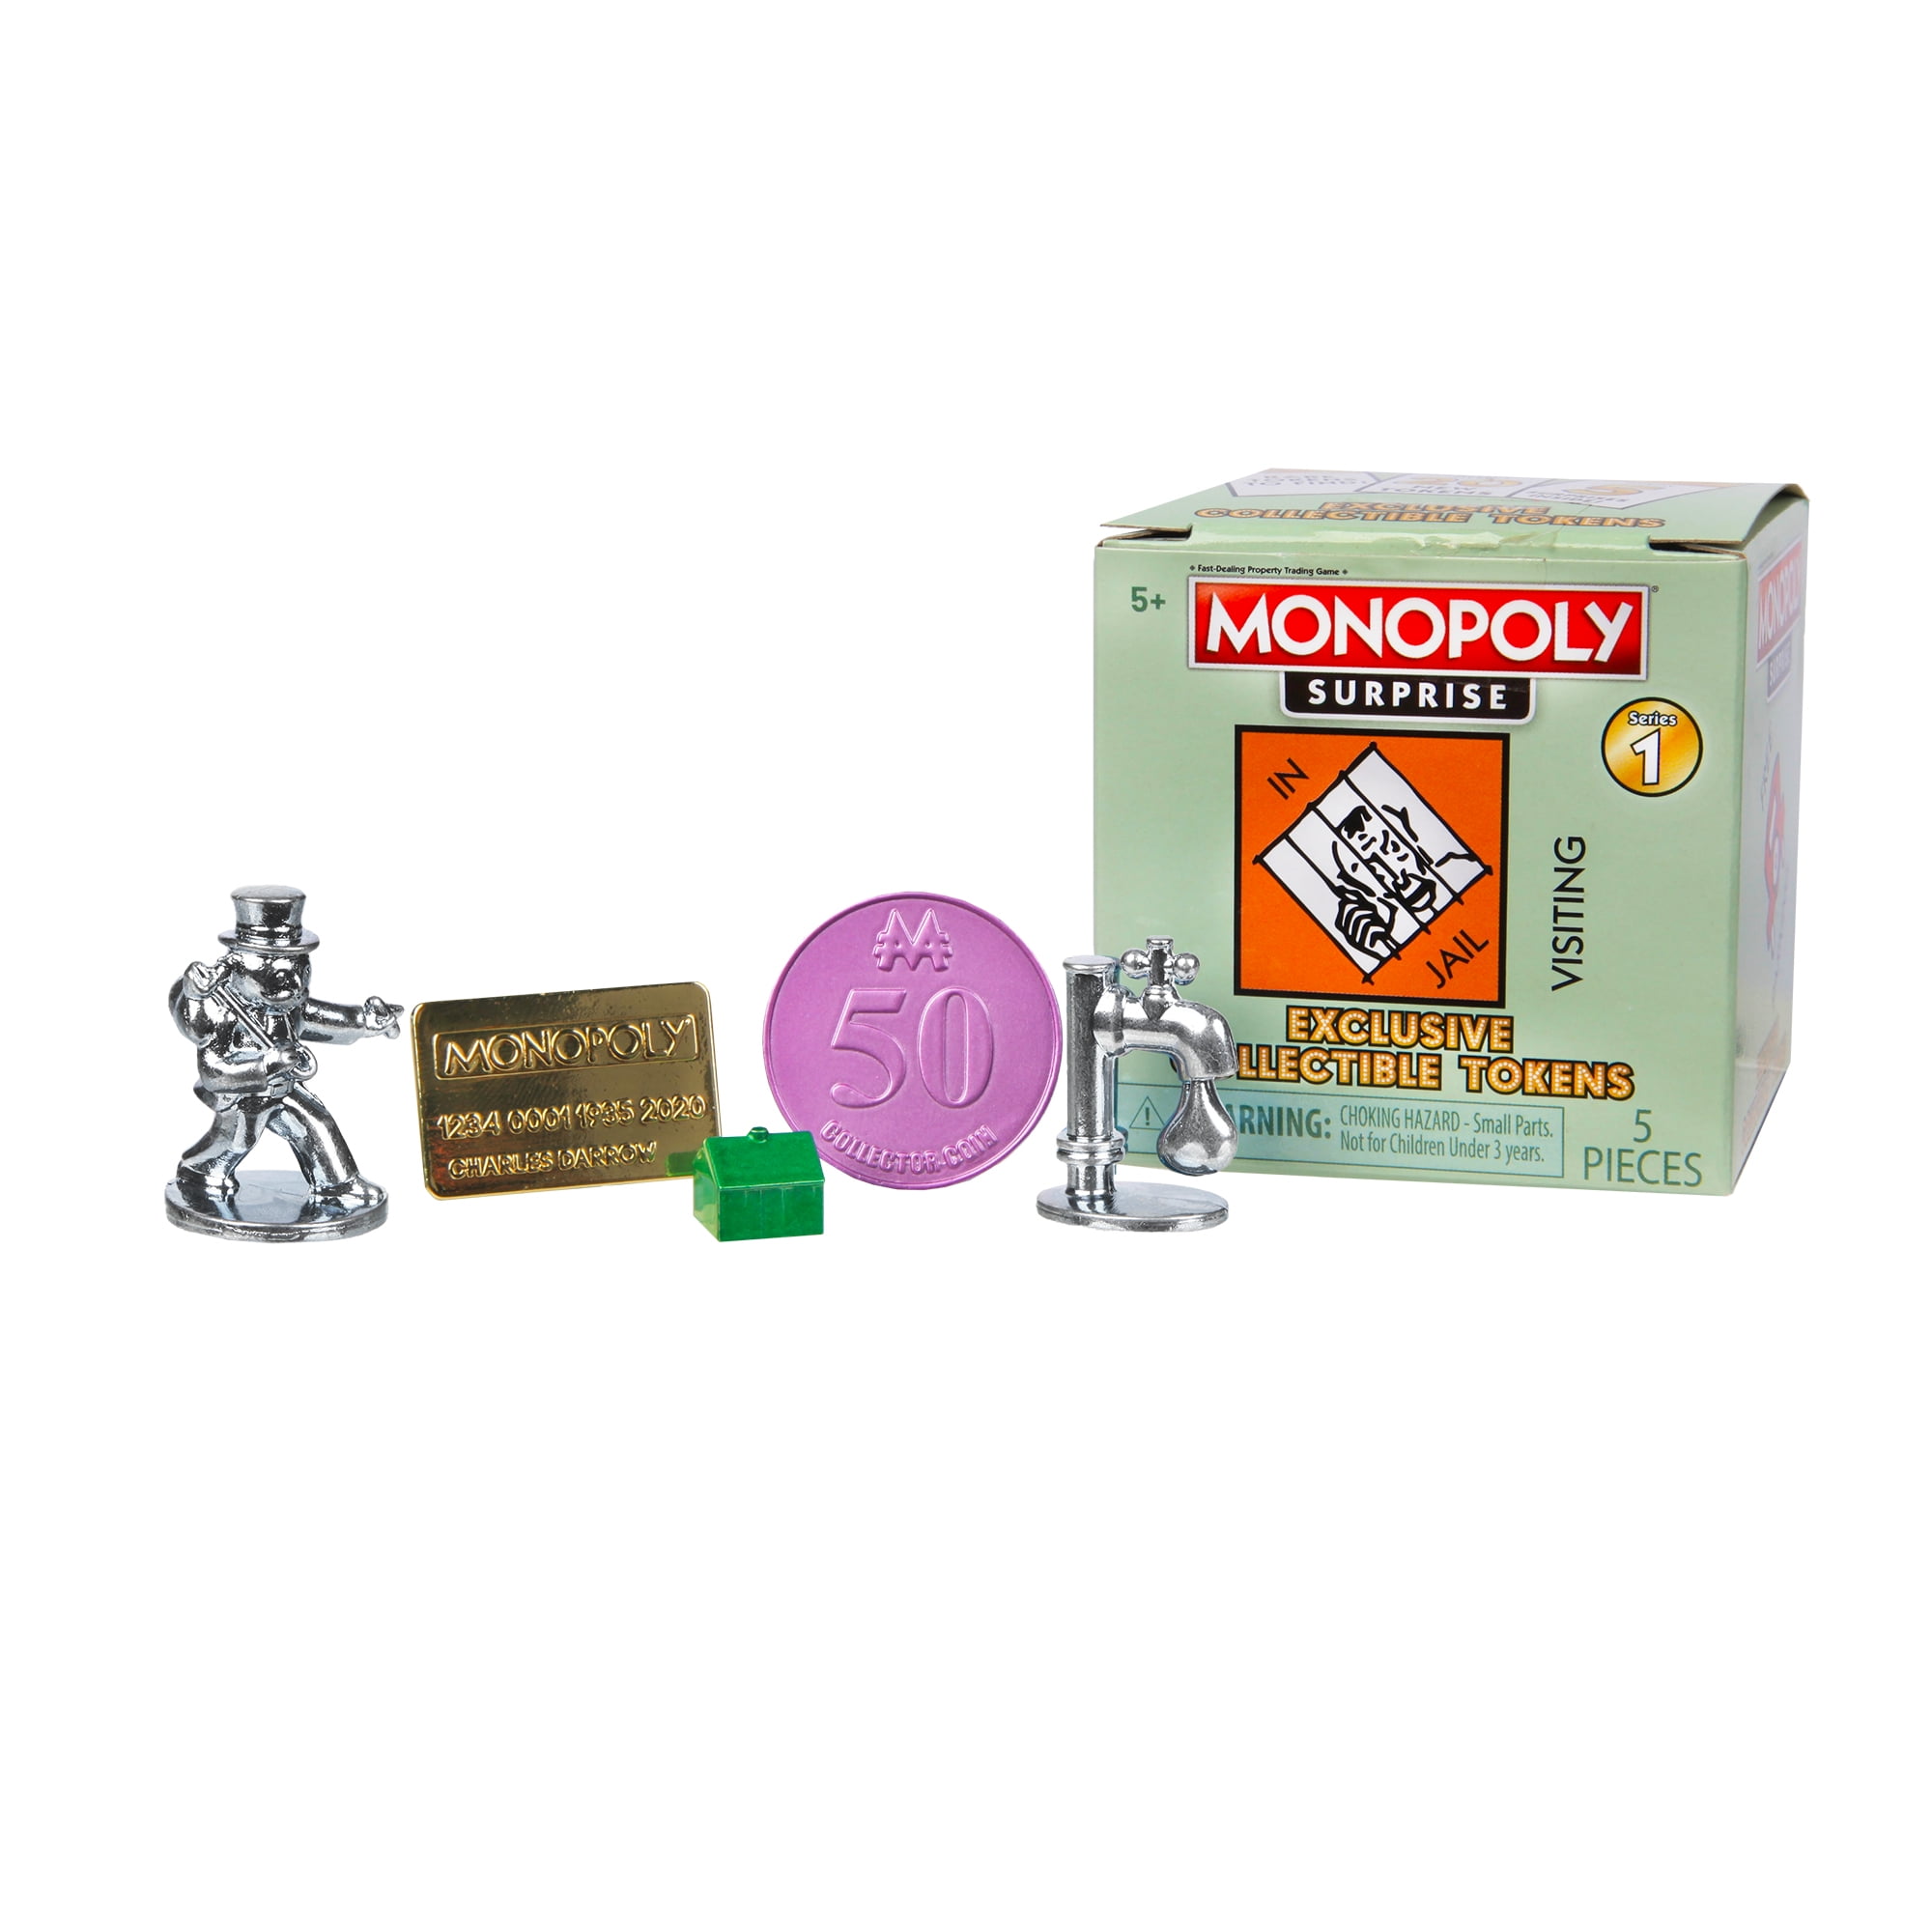 Lot 3 Monopoly Surprise Community Chest ALL Tokens Complete Set SEALED 1T 2T 3T 